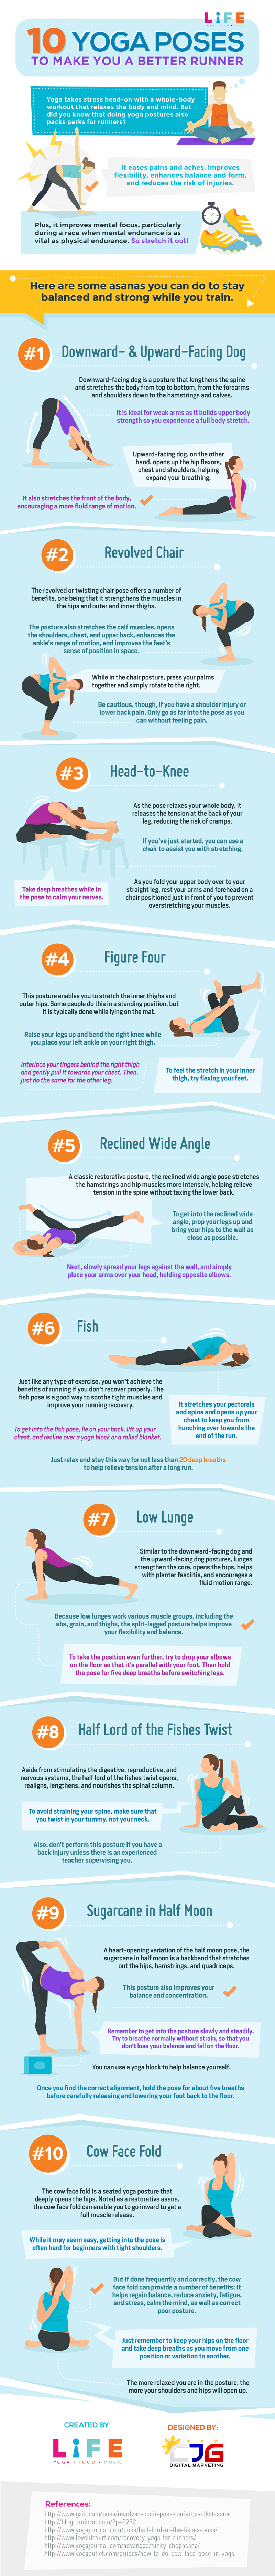 10-Yoga-Poses-to-Make-You-a-Better-Runner